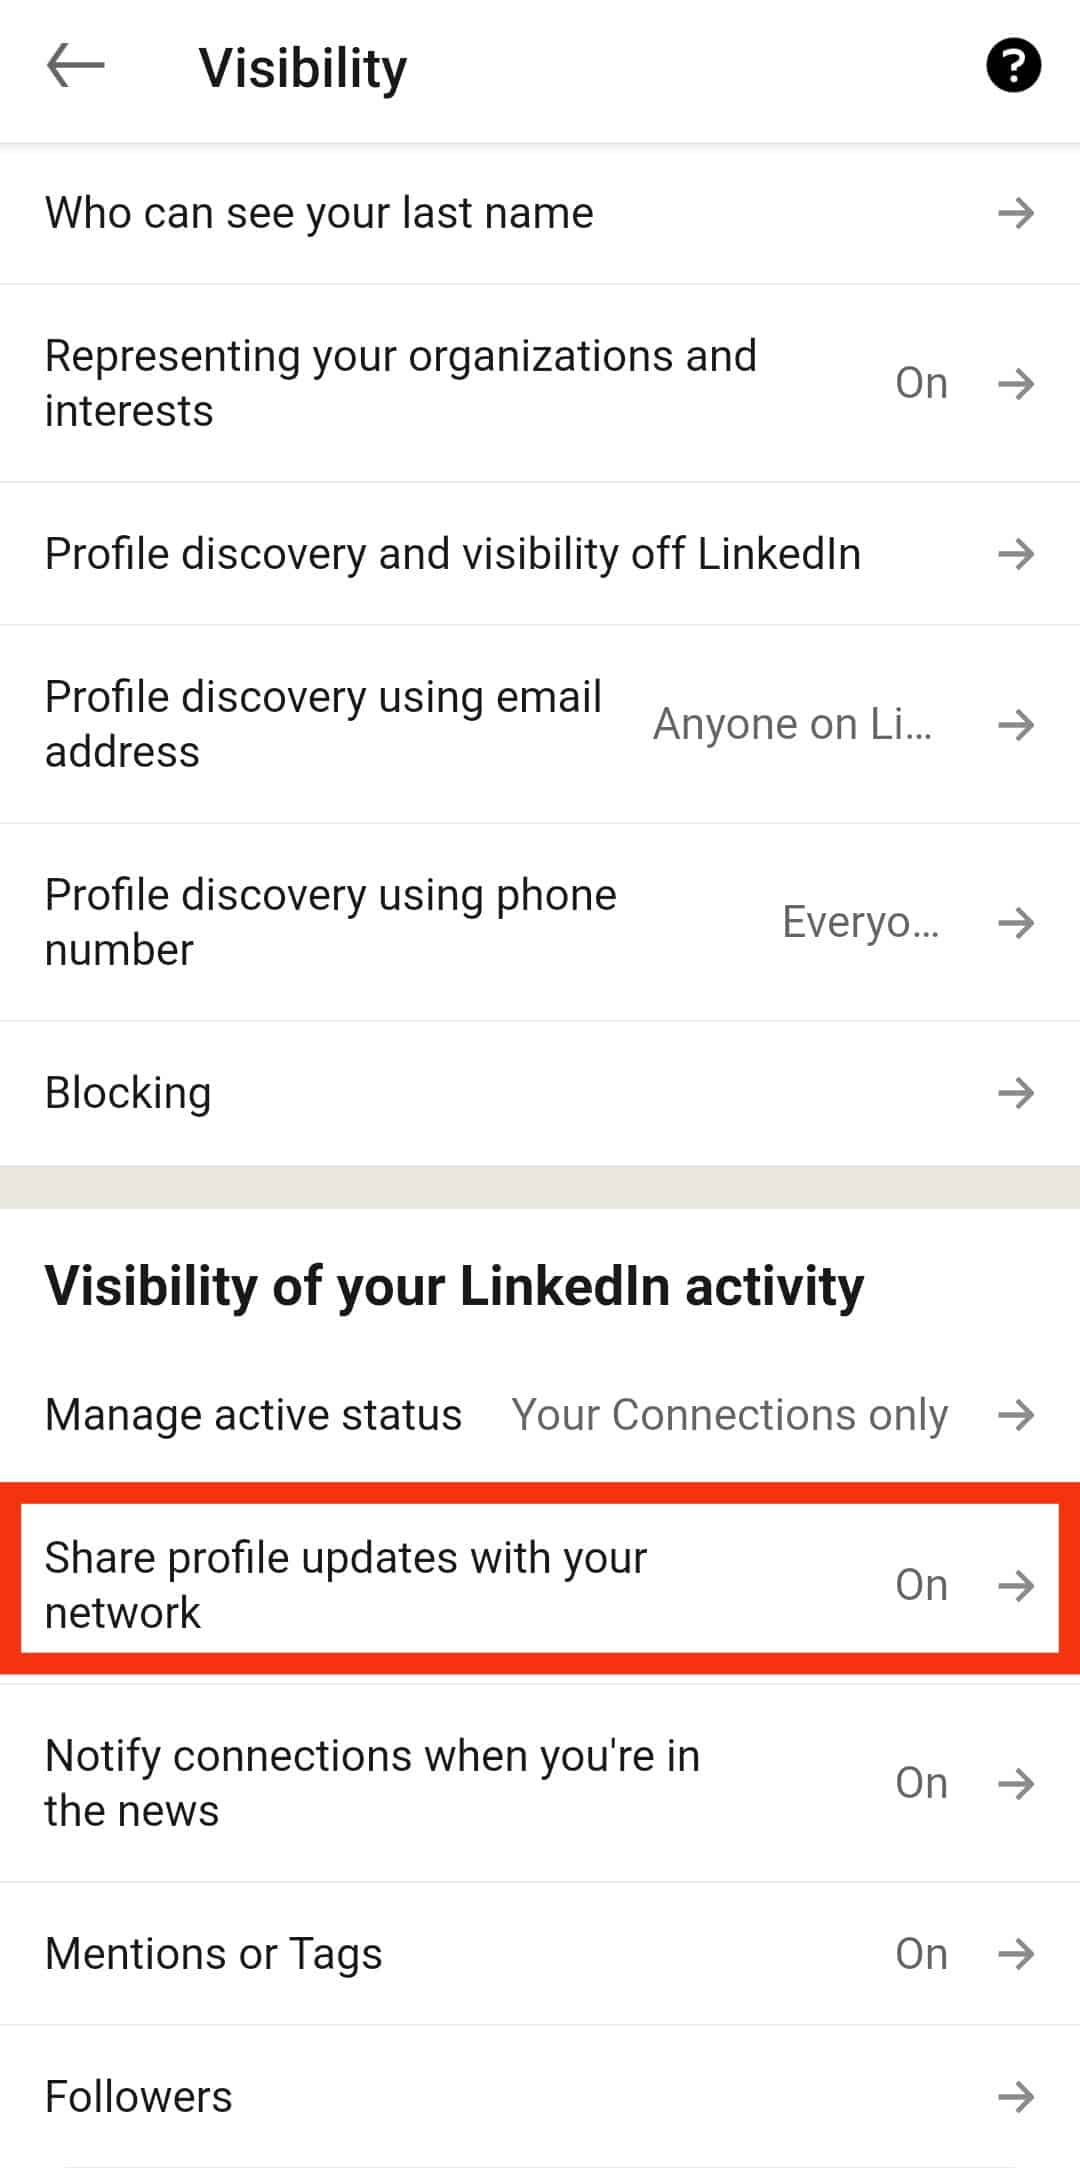 Click Share Profile Updates With Your Network